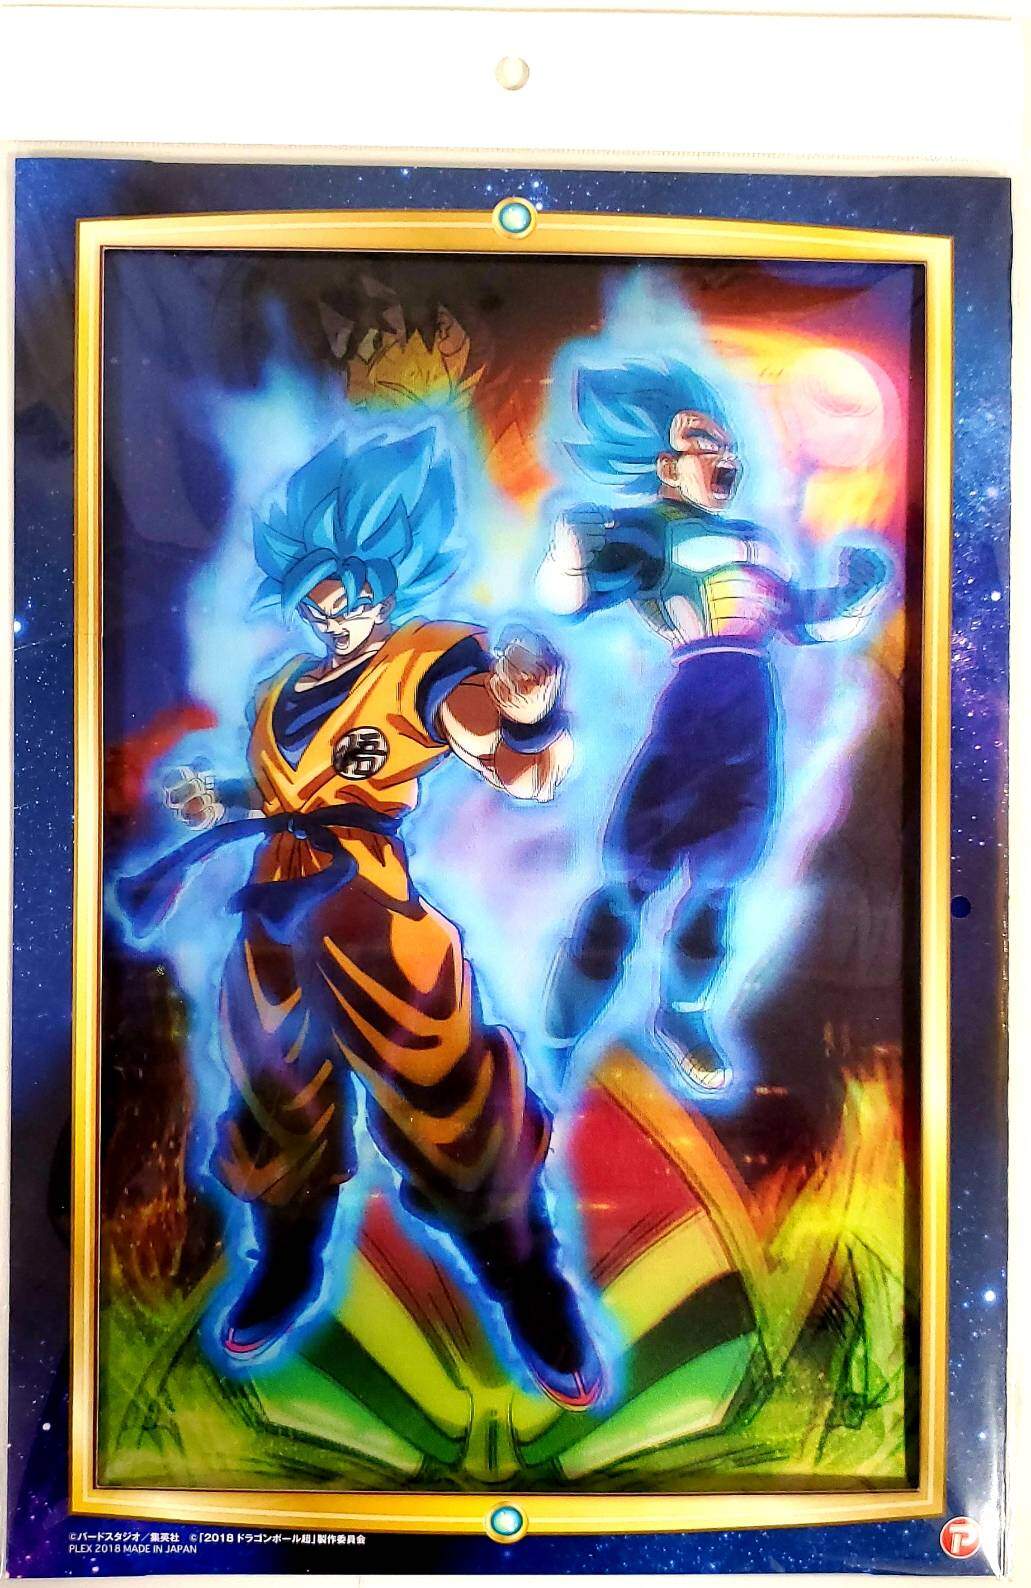 DRAGON BALL SUPER THE MOVIE “BROLY” 3D ART COLLECTION (POSTER)